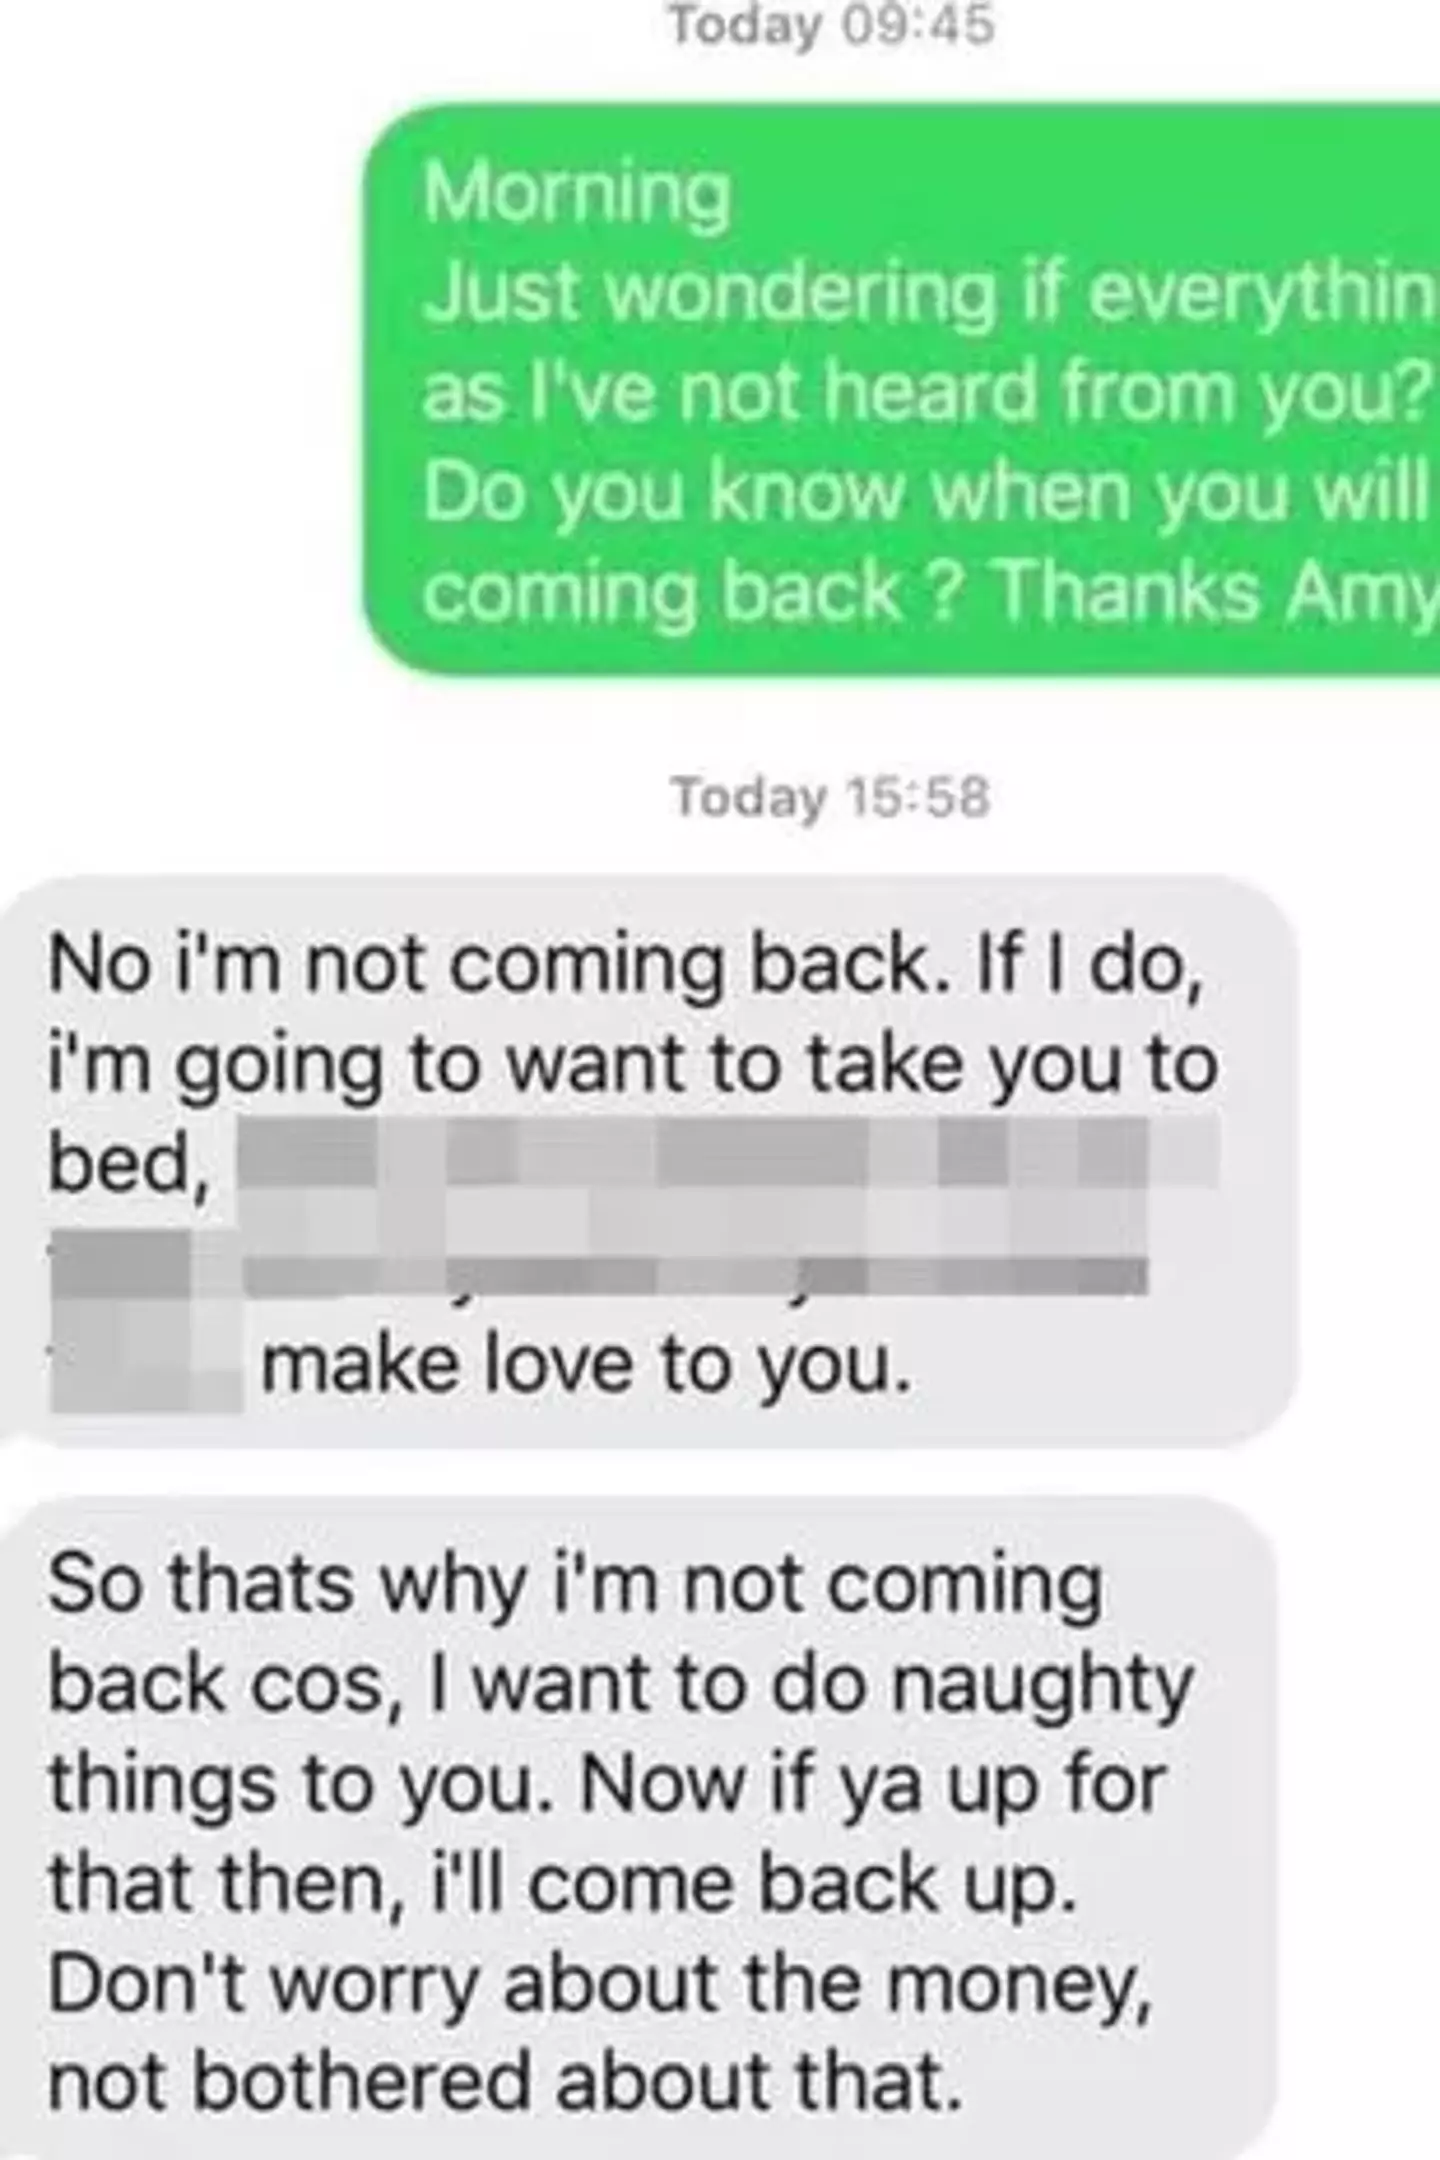 Here's the text that was sent to the poor woman.